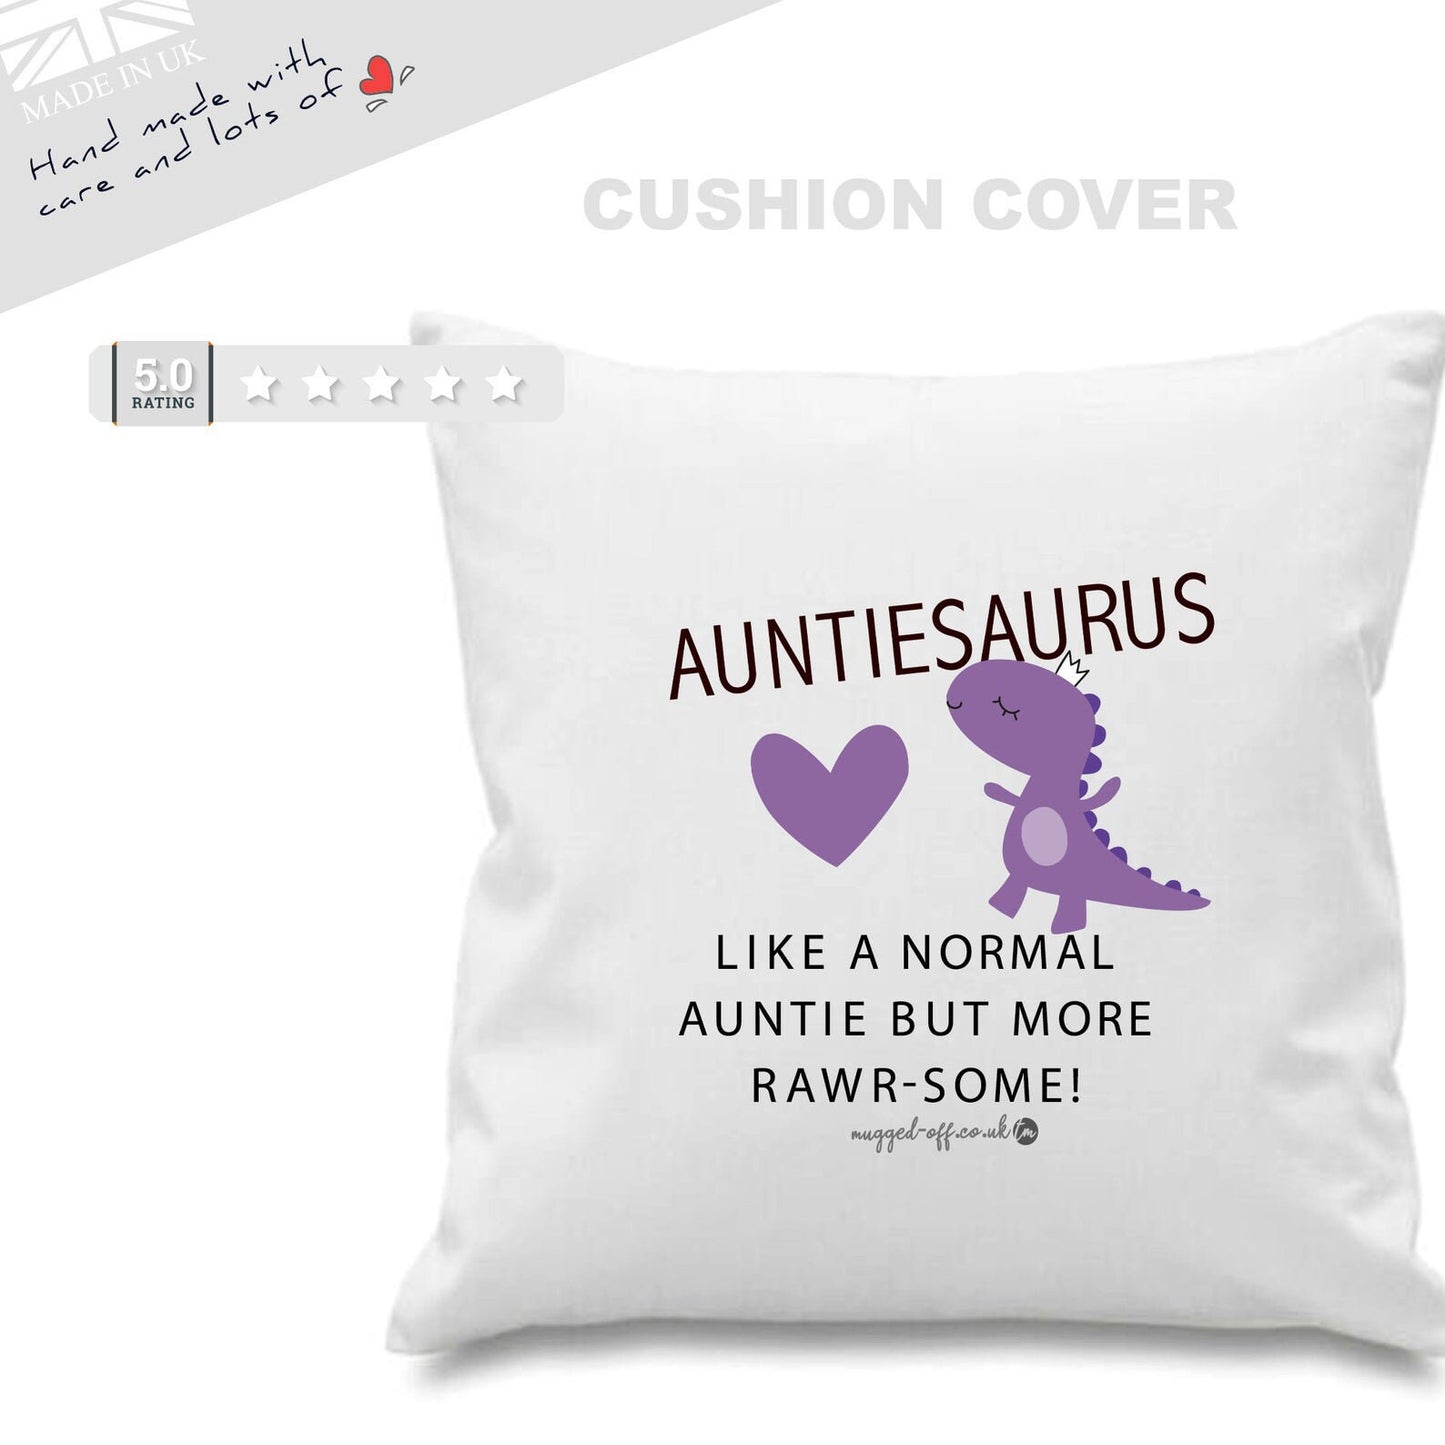 Auntie Cushion Cover - Funny Auntie Cushion Cover Auntiesaurus